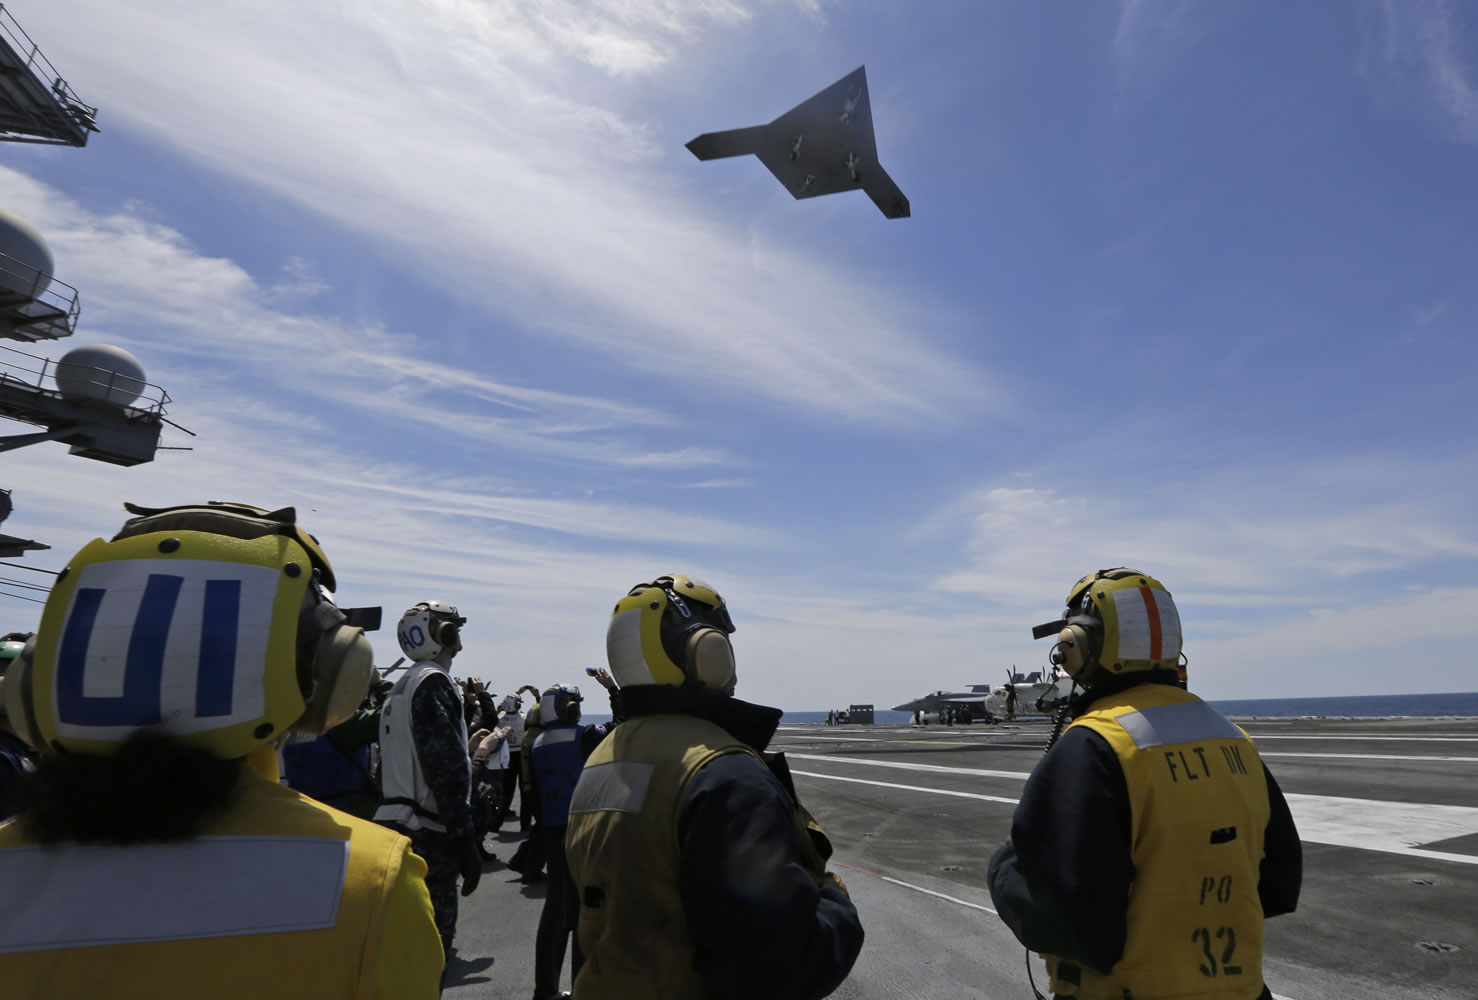 A Navy X-47B drone flies over the aircraft carrier USS George H. W.